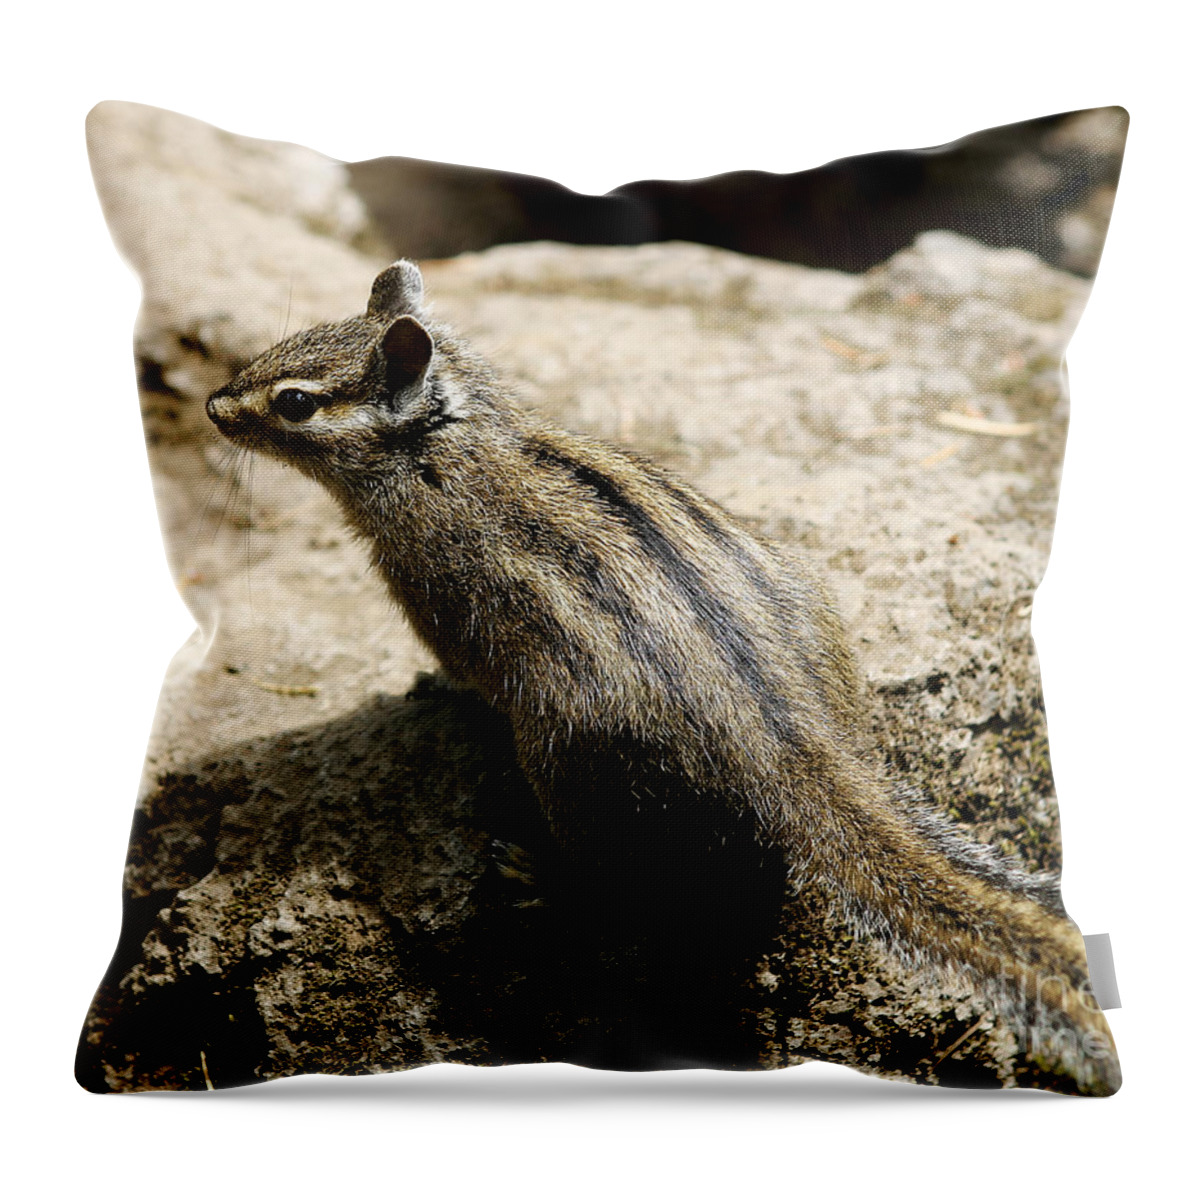 Chipmunk Throw Pillow featuring the photograph Chipmunk on a Rock by Belinda Greb